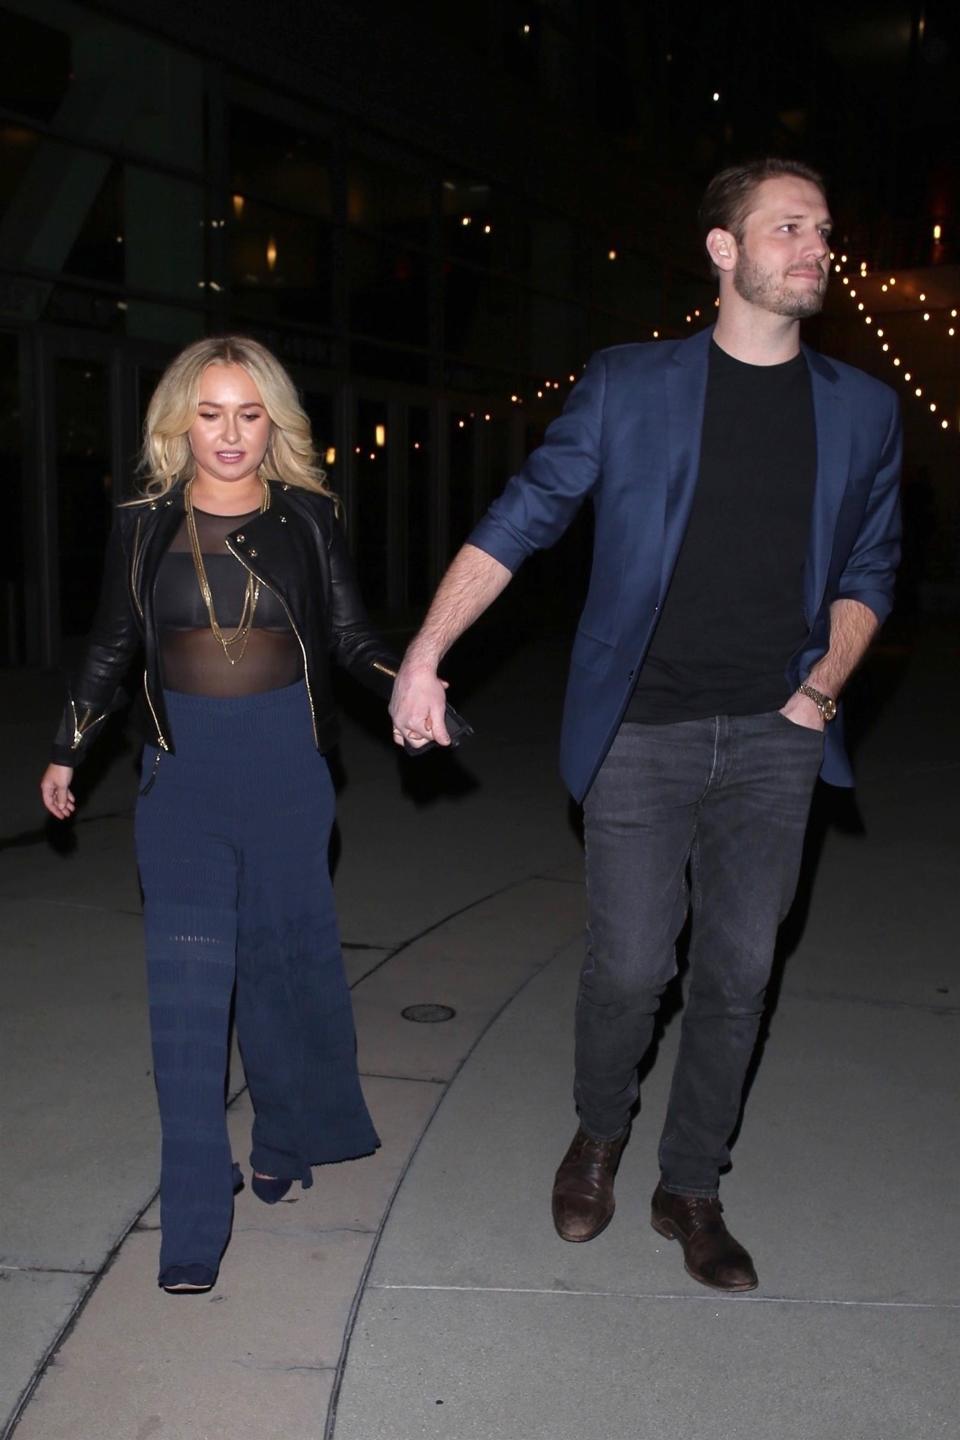 Hollywood, CA  - Actress Hayden Panettiere's boyfriend Brian Hickerson was arrested for domestic violence after an altercation at the couple's home during the early hours of Thursday.  Things got ugly between the pair after they came home following a night of drinking in Hollywood and got into a blow-up fight, according to insiders who spoke to TMZ.  Police visited the residence around 2am, when they noticed 'redness and marks' on the Nashville actress' body.   Pictured on these file photos enjoying a movie night at ArcLight theater in Hollywood. **SHOT ON 01/31/2019**    Pictured: Hayden Panettiere, Brian Hickerson    BACKGRID USA 3 MAY 2019     BYLINE MUST READ: Roger / BACKGRID    USA: +1 310 798 9111 / usasales@backgrid.com    UK: +44 208 344 2007 / uksales@backgrid.com    *UK Clients - Pictures Containing Children  Please Pixelate Face Prior To Publication*